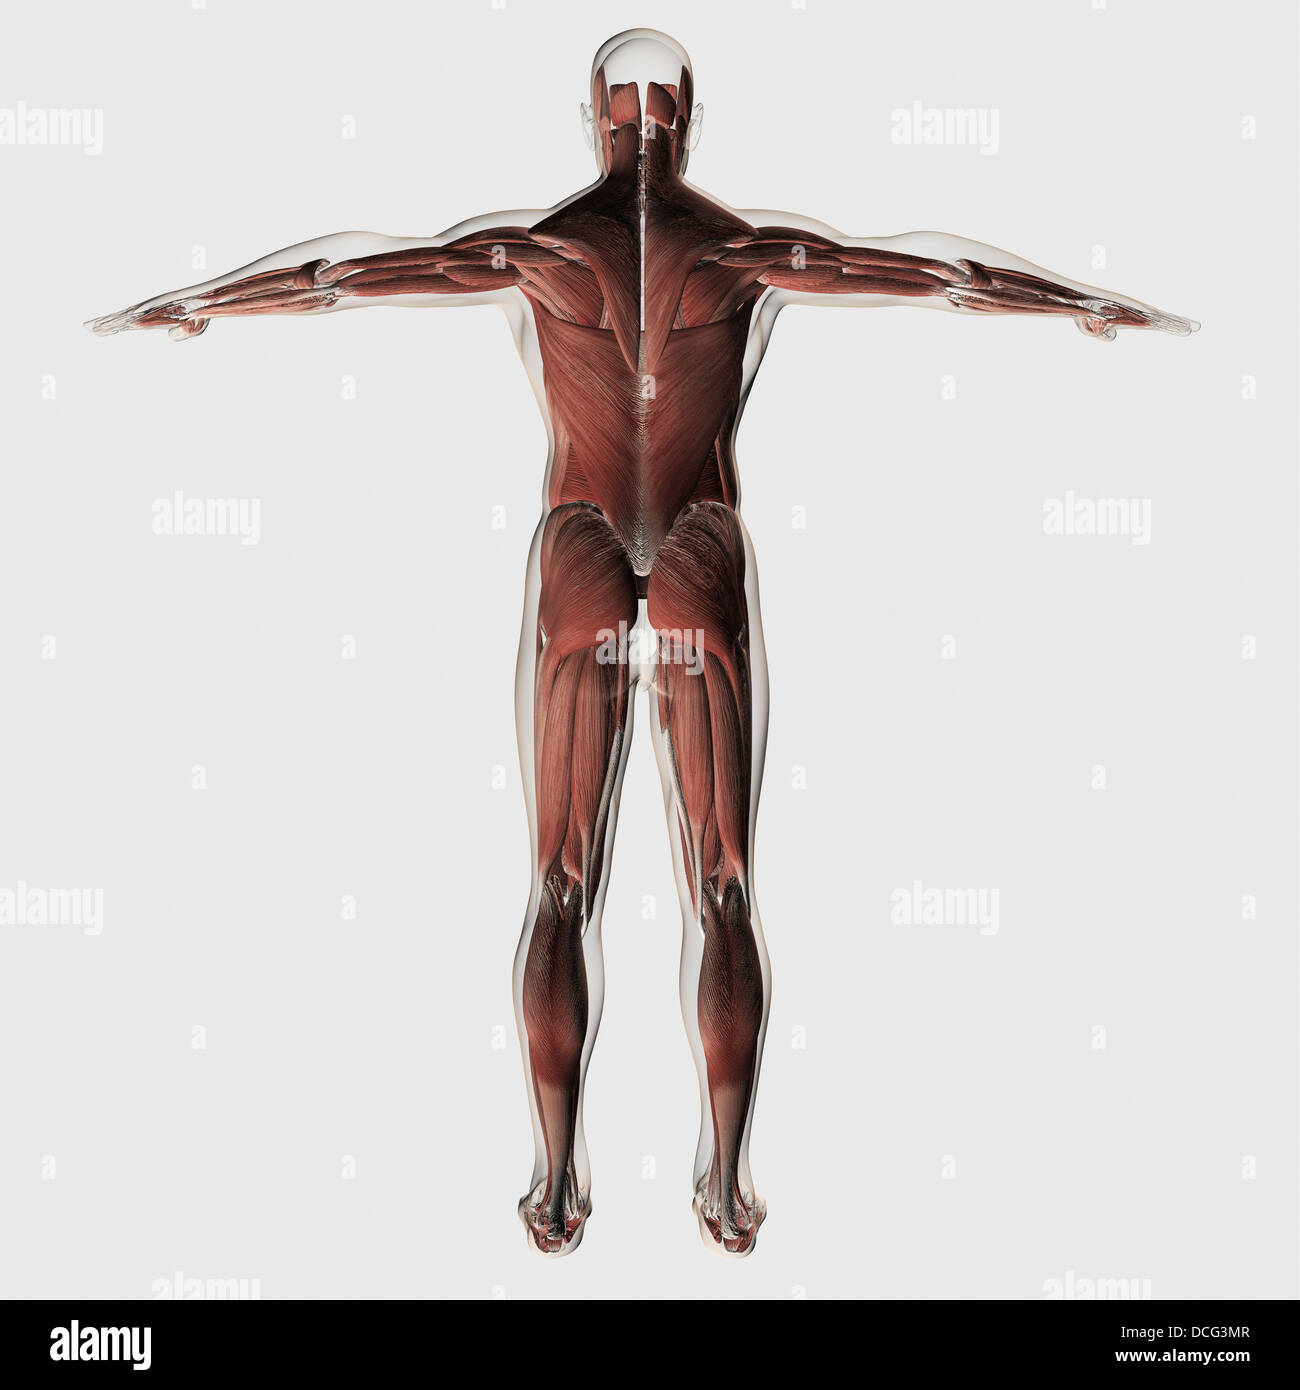 Anatomy of male muscular system, posterior view. Stock Photo